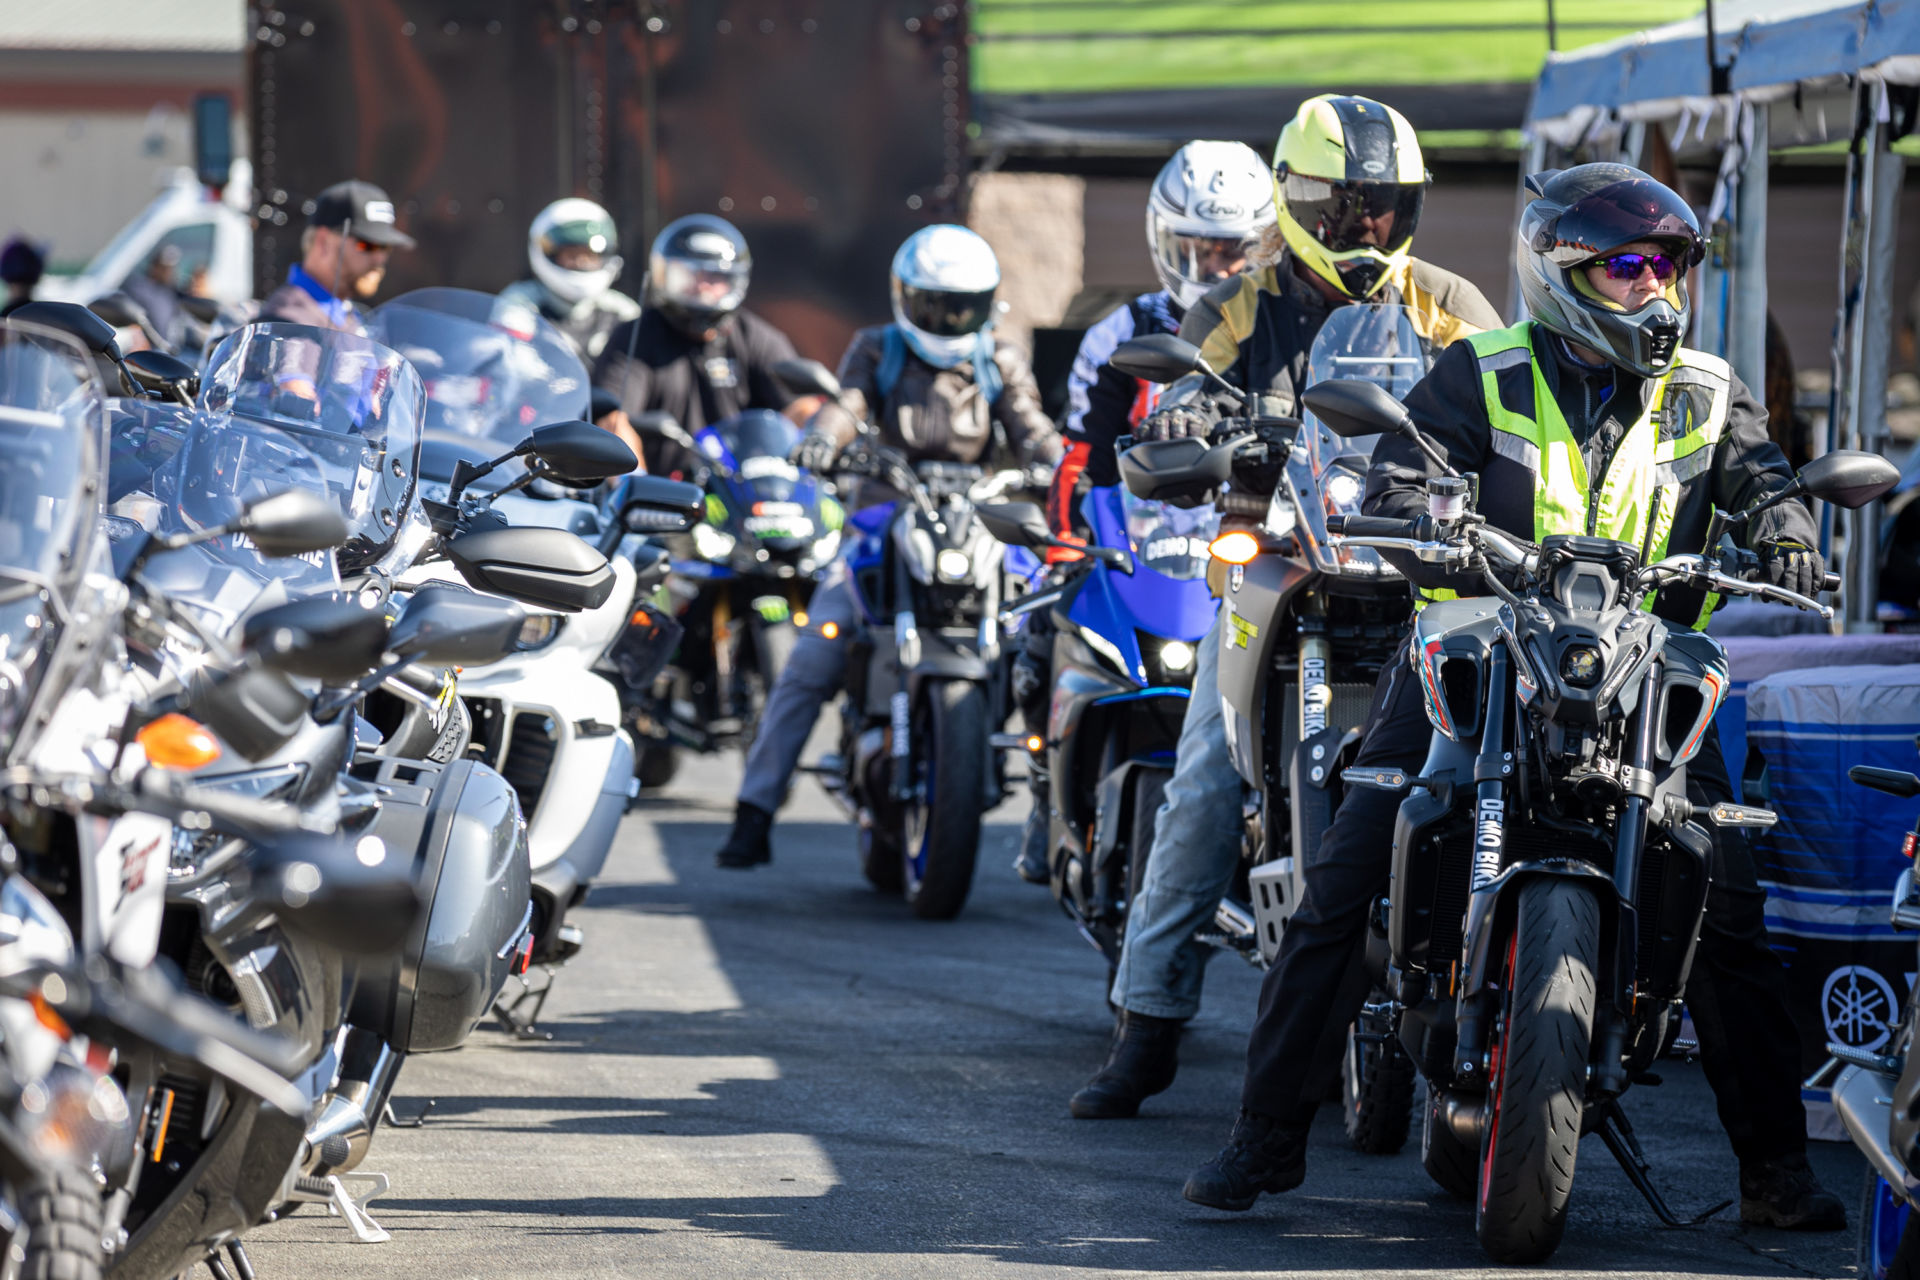 Demo bike riders during the IMS Outdoors show at Sonoma Raceway in 2021. Photo courtesy IMS Outdoors.